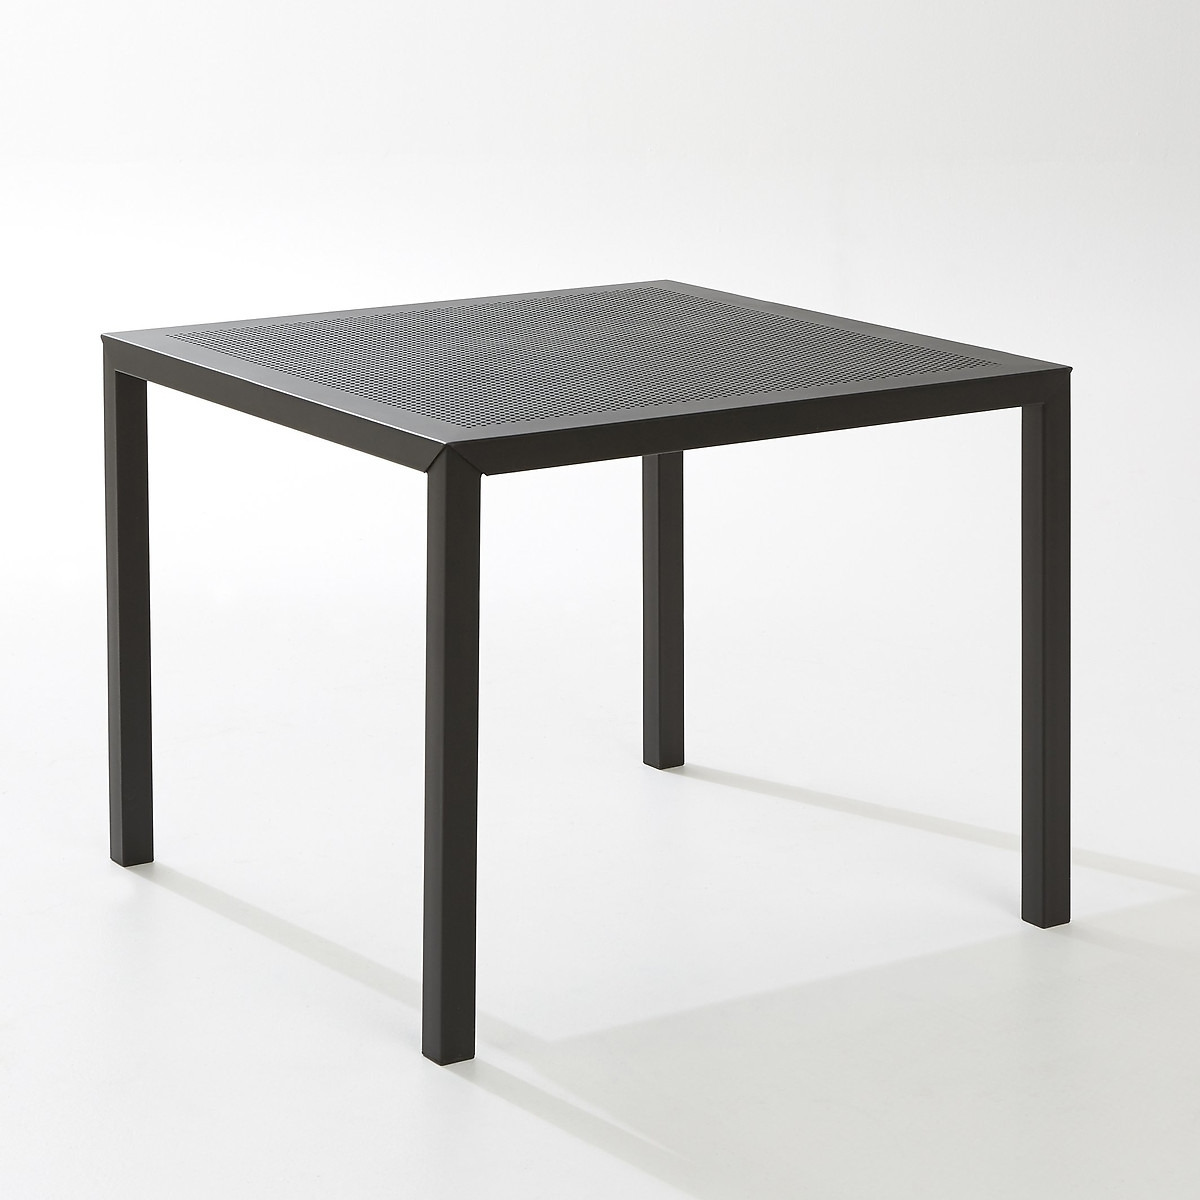 Choe Square Garden Table in Perforated Metal - image 1